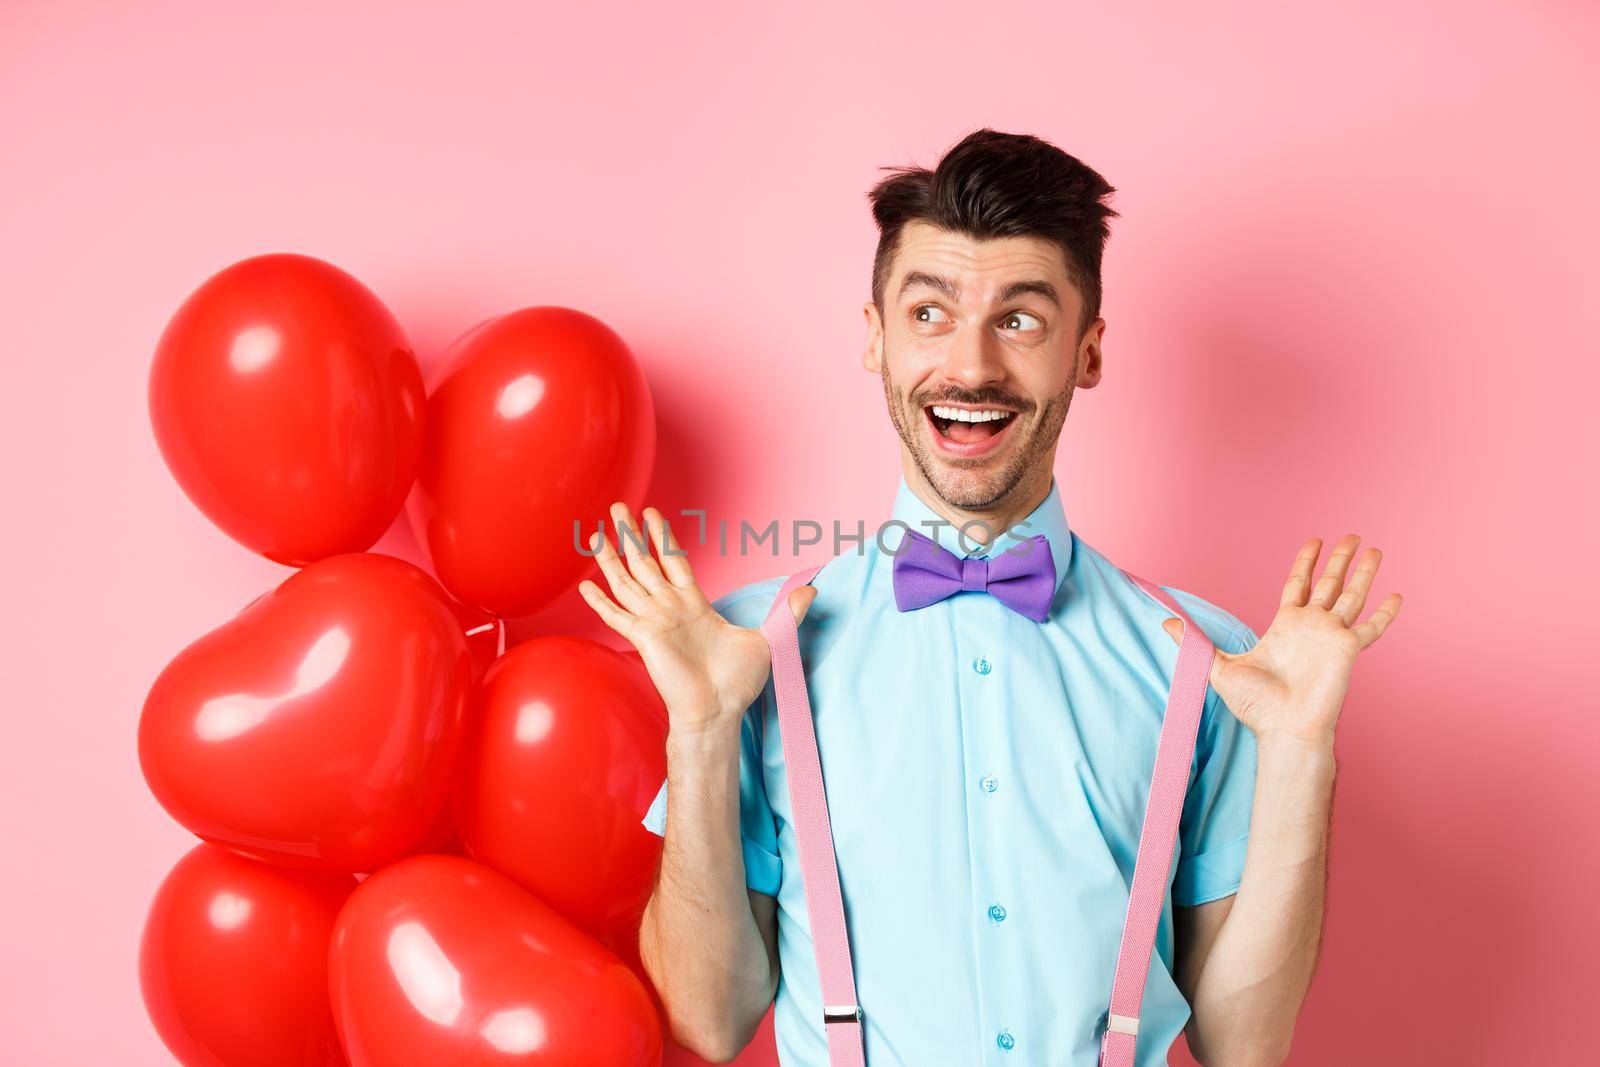 Love and romance concept. Happy man screaming from fantastic news, shouting wow and smiling amused, checking out special offer on Valentines, standing near red hearts balloons by Benzoix